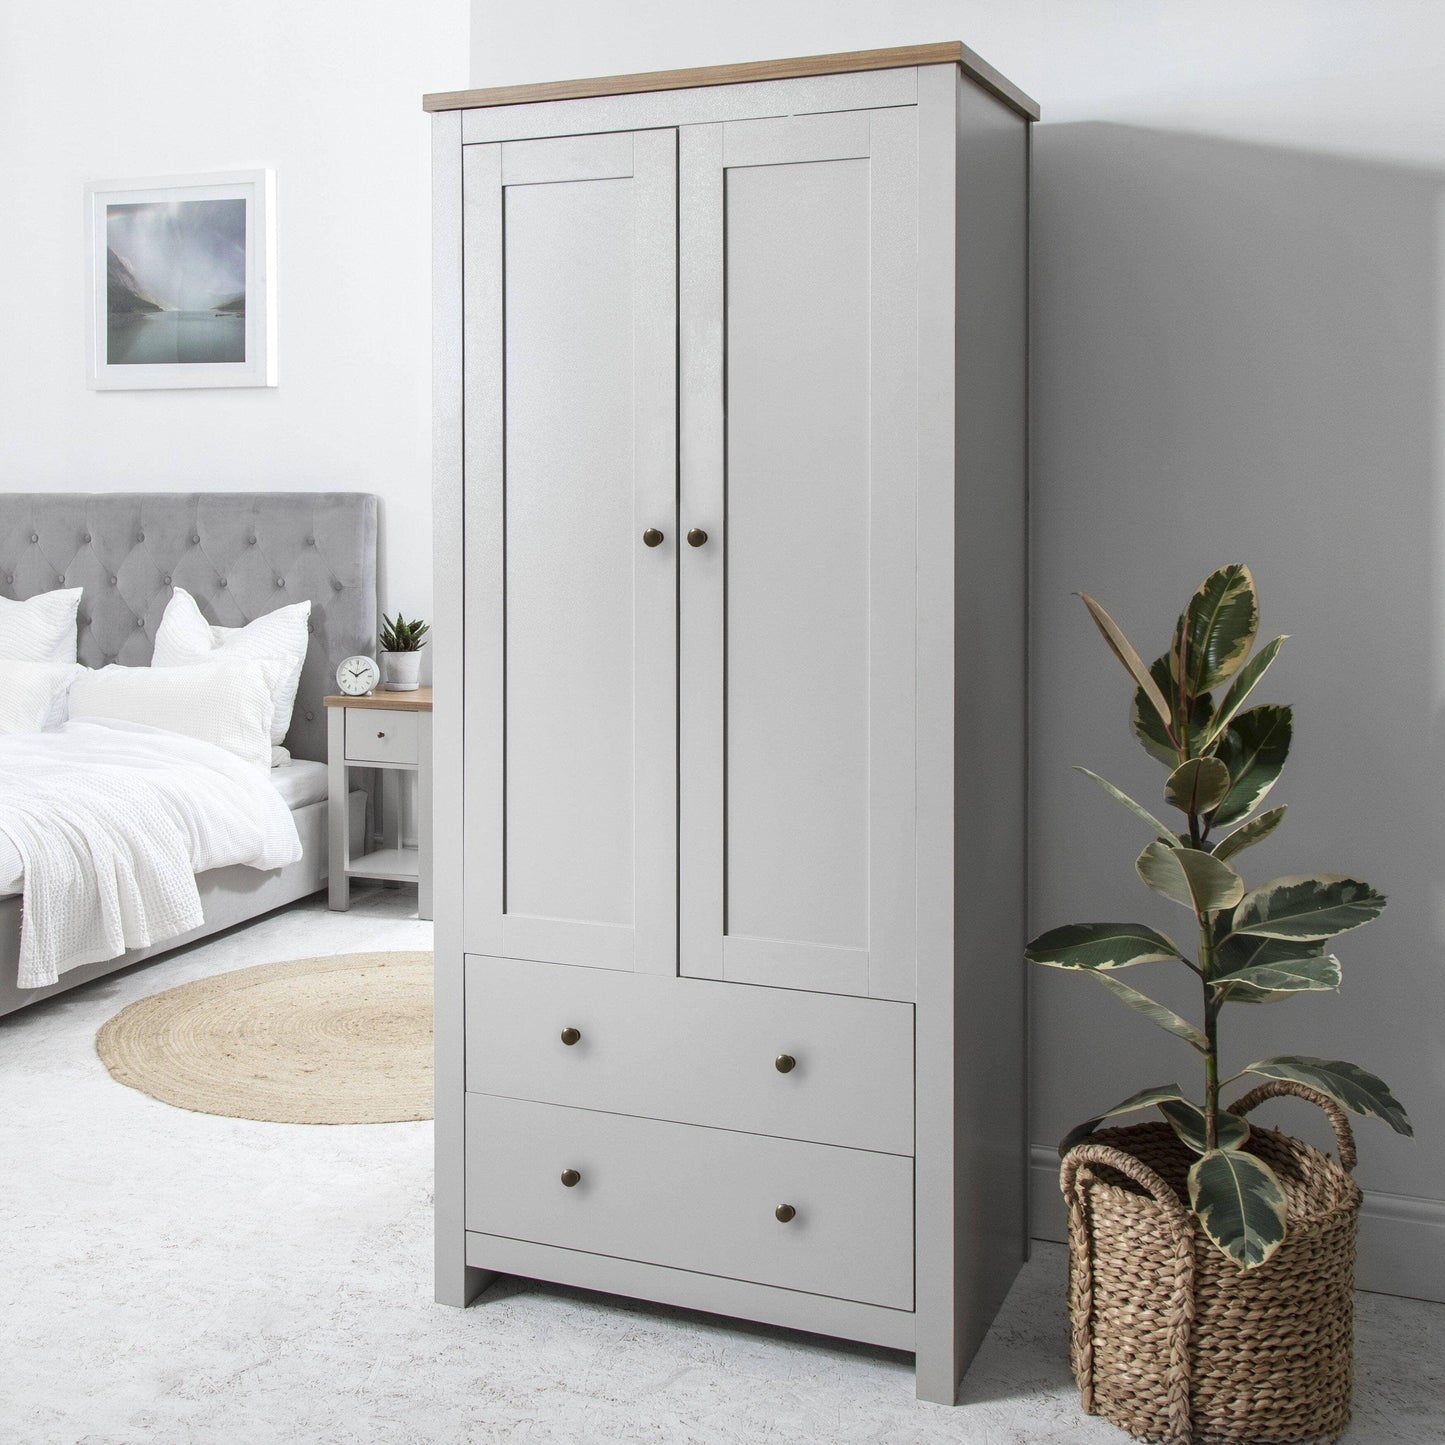 Bampton Furniture Set with Double Wardrobe - Chest of 4 Drawers and 3 Drawer Bedside Tables - Laura James